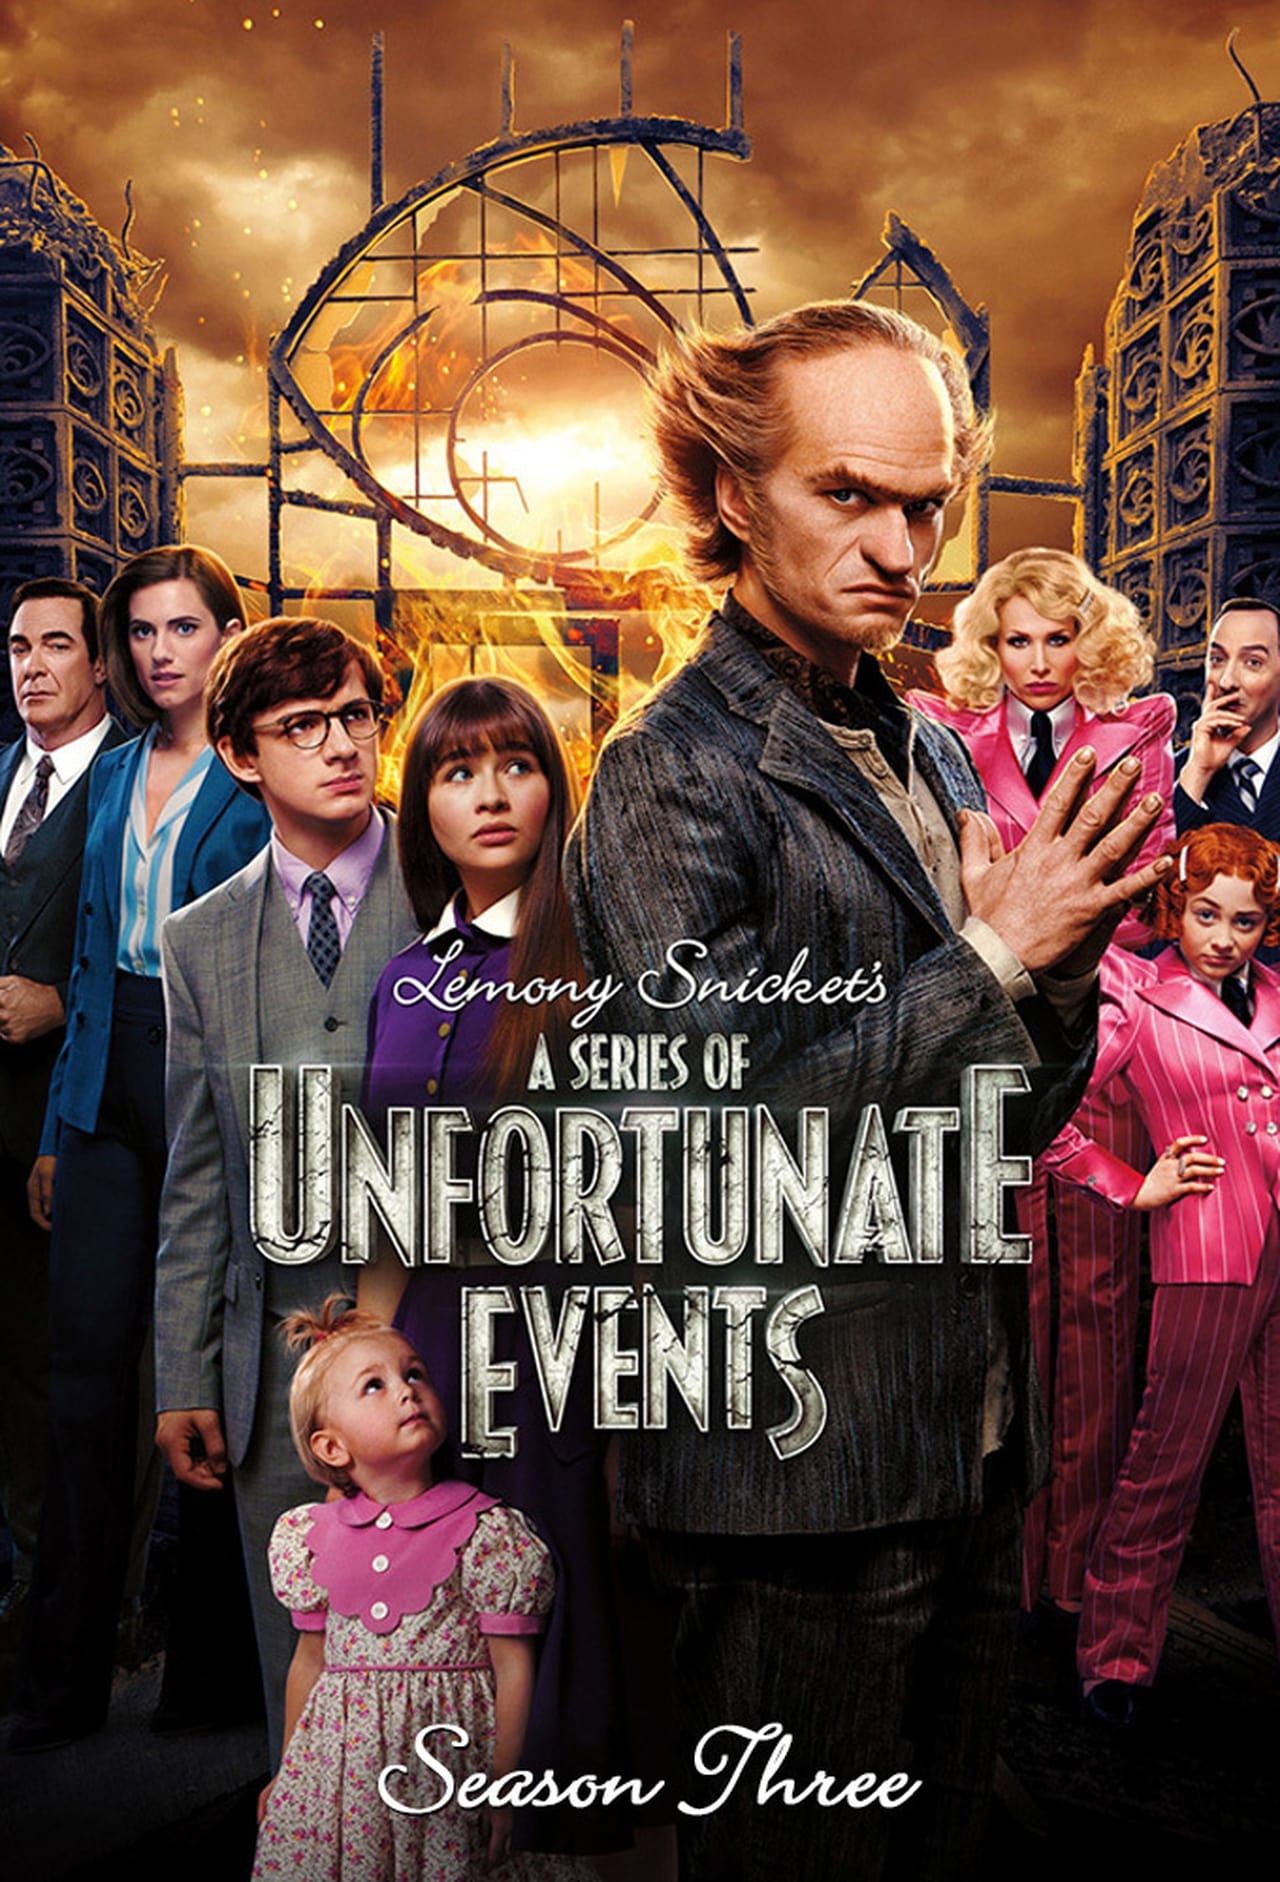 A Series of Unfortunate Events (2019) S3 EP01&EP07 640Kbps 24Fps 48Khz 5.1Ch DD+ NF E-AC3 Turkish Audio TAC